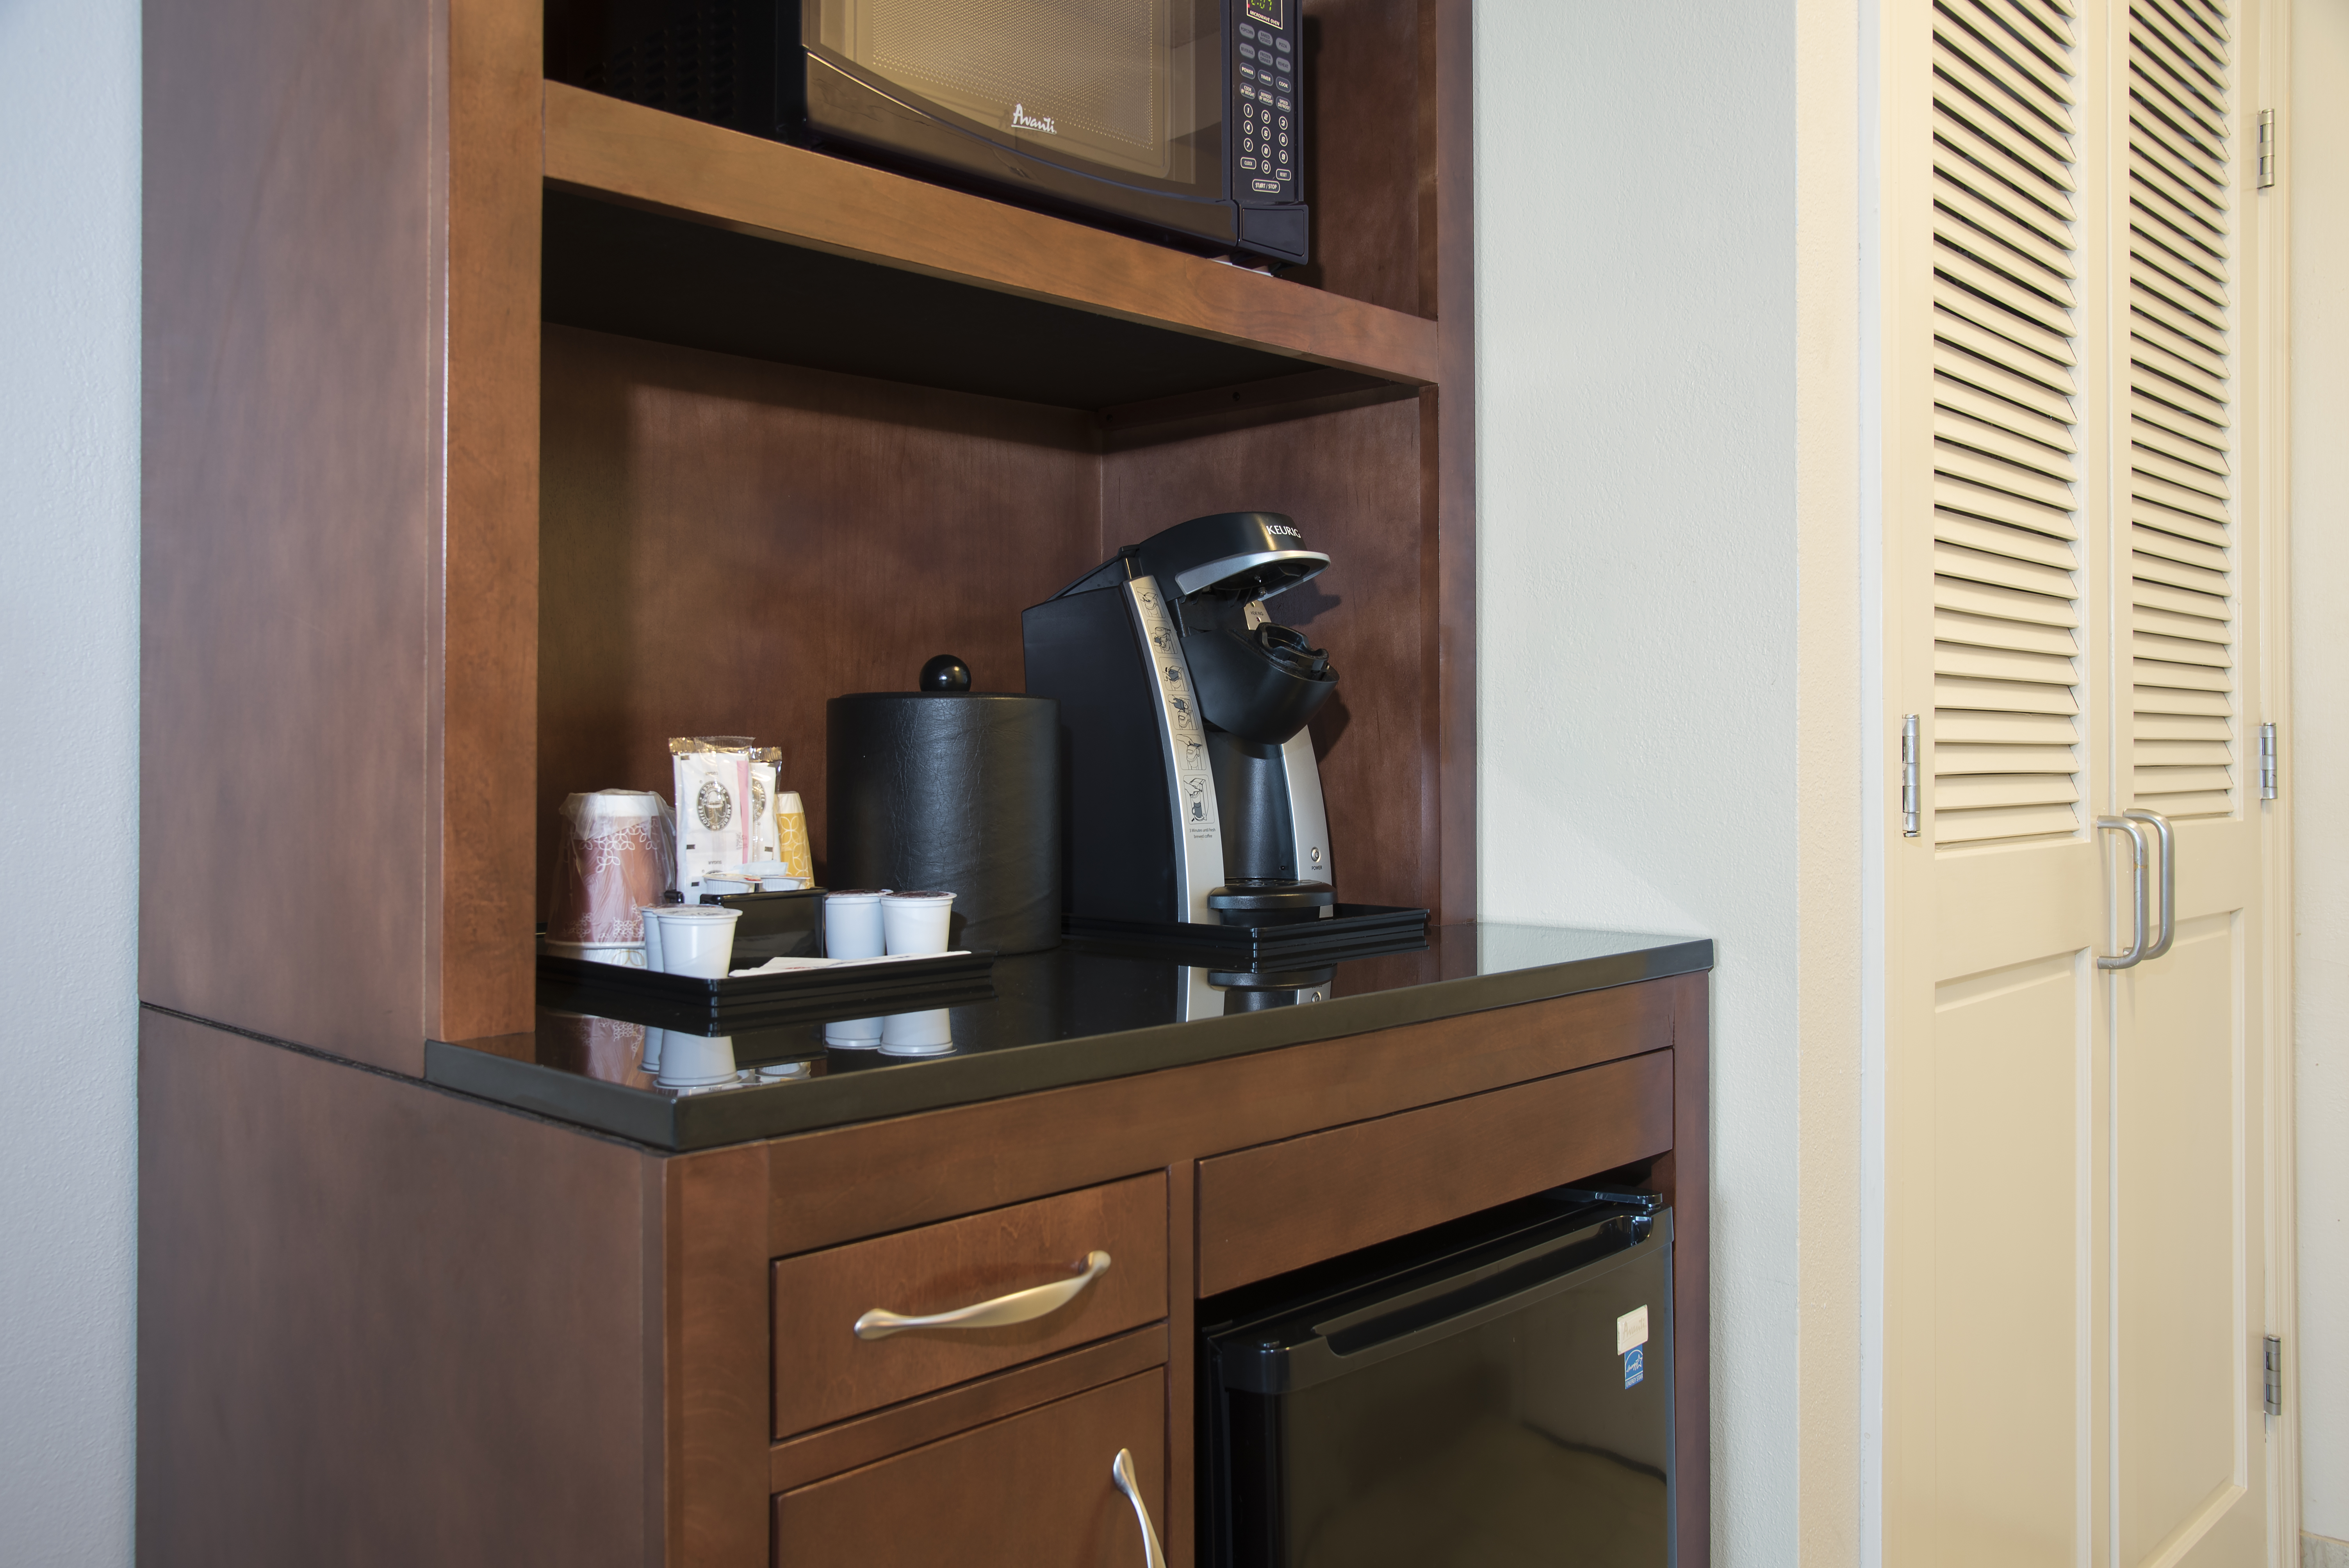 Guest Room Hospitality Center With Microwave, Keurig, Ice Bucket And Mini Fridge